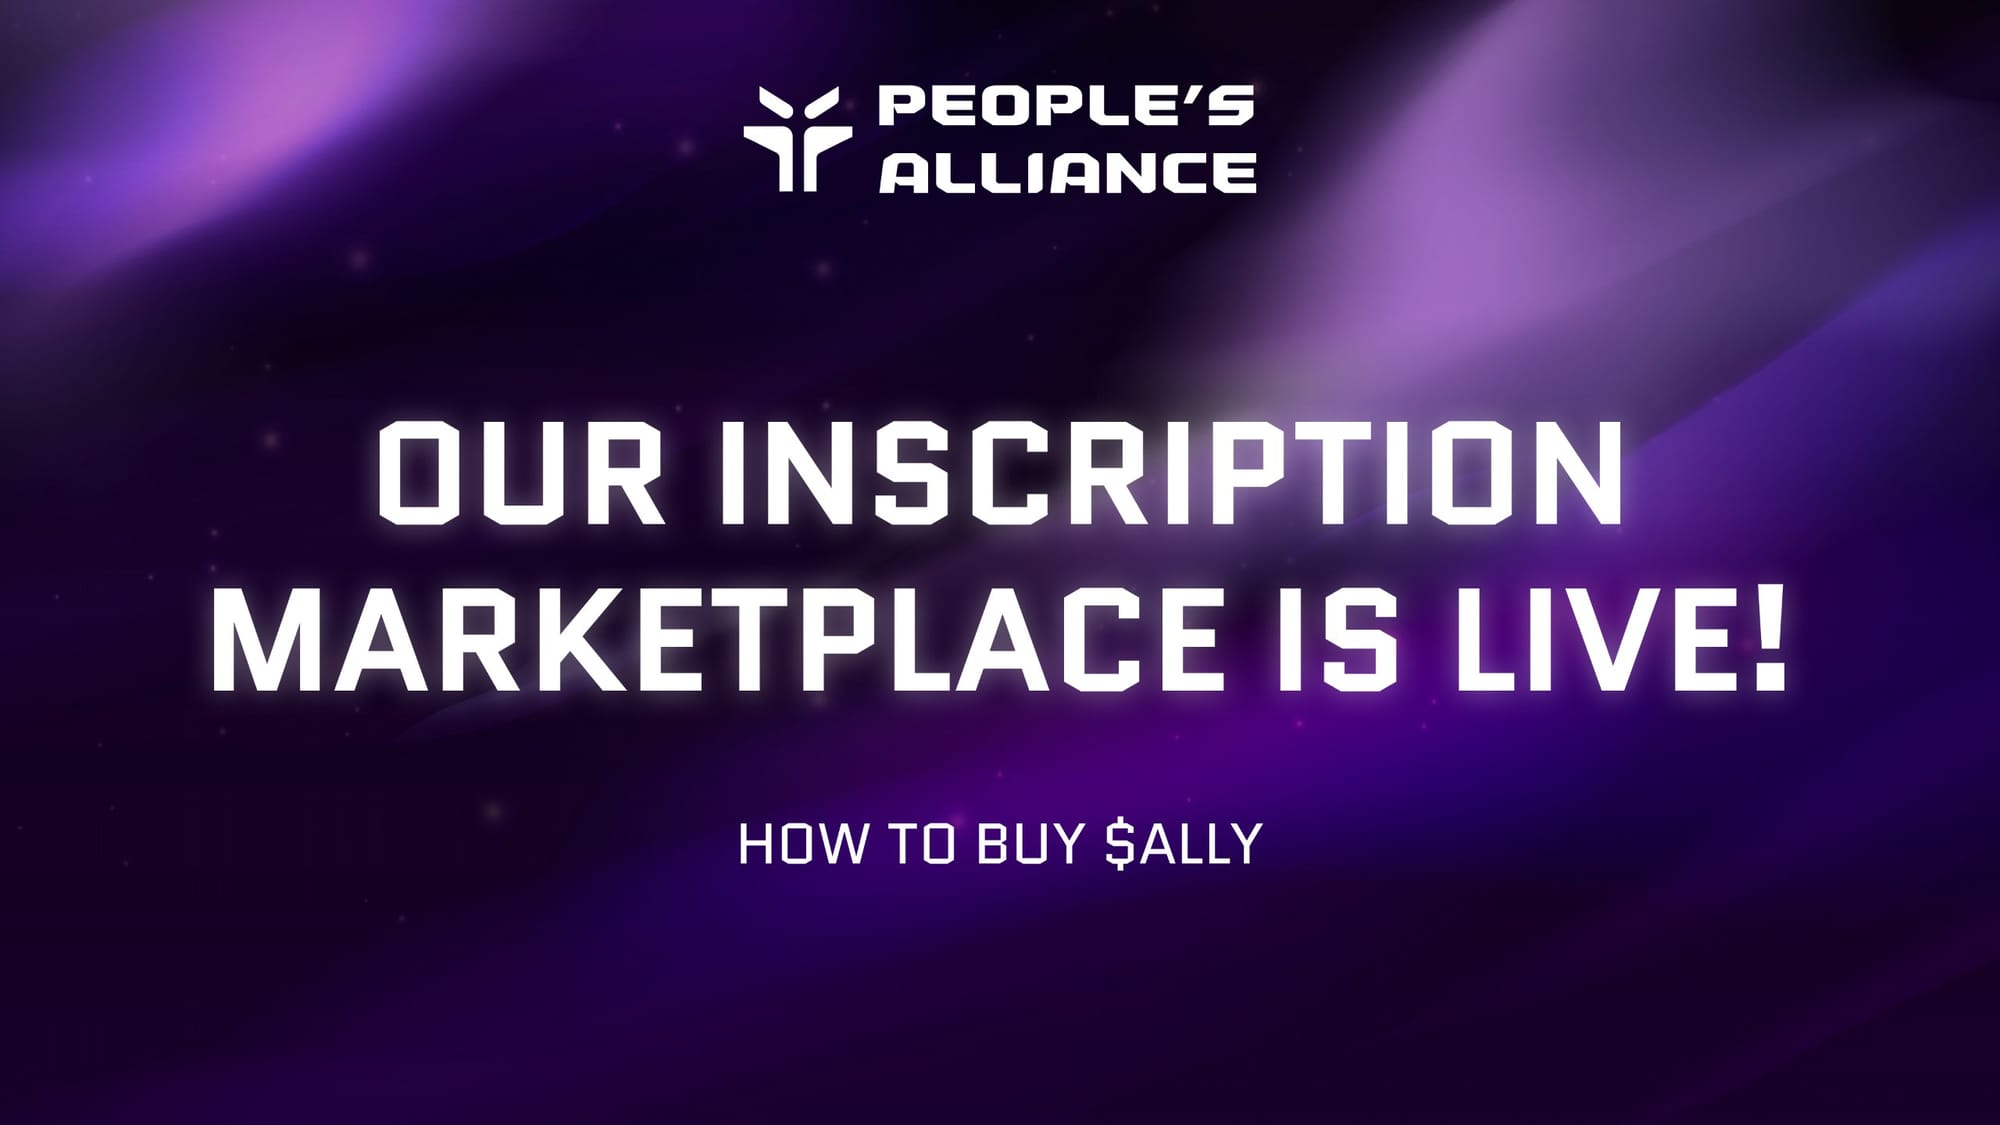 The People’s Inscription Marketplace is Live! Here’s how to buy $ALLY & more.